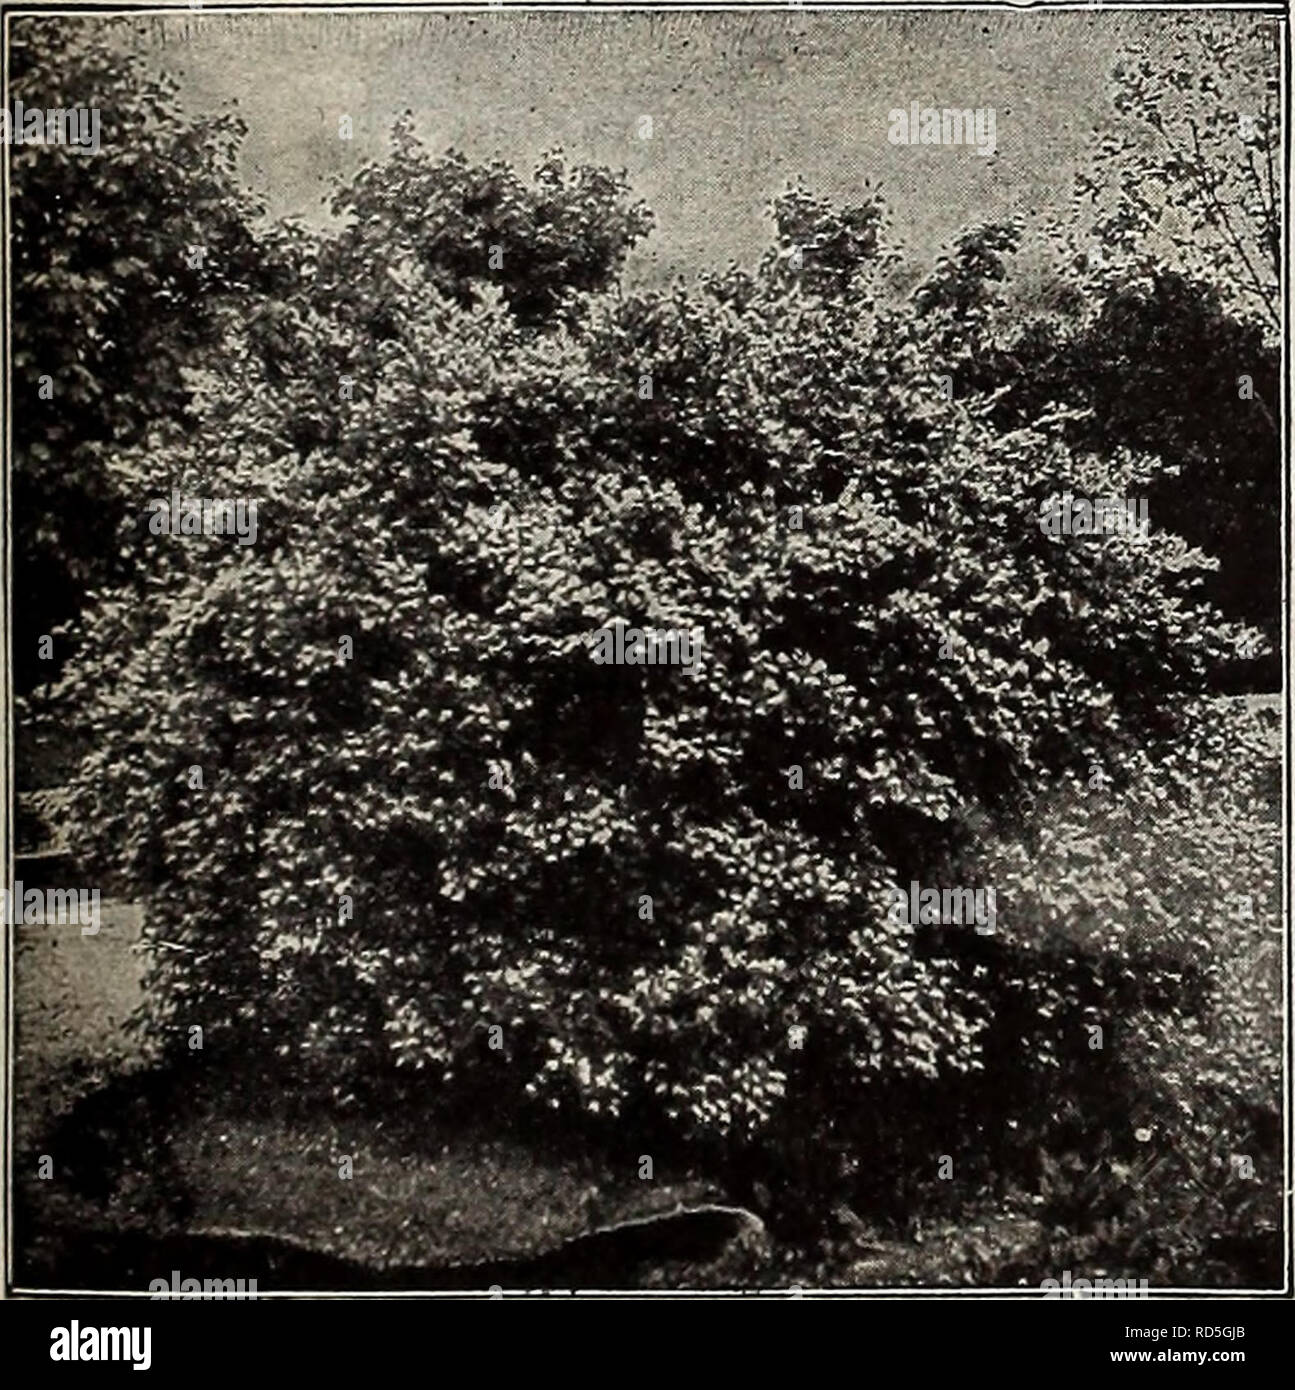 . Currie's farm and garden annual : spring 1914. Flowers Seeds Catalogs; Bulbs (Plants) Seeds Catalogs; Vegetables Seeds Catalogs; Nurseries (Horticulture) Catalogs; Plants, Ornamental Catalogs; Gardening Equipment and supplies Catalogs. 113 BED OF TOTING PLANTS OF HYDRANGEA PANICULATA GRANDIFLOEA. LIGUSTRXTM—Privet. A class of sub-evergreen plants, thrifty and robust in habit, suitable for grouping or for hedges. L. Ibotn—An excellent hedge plant, also valuable as a single specimen on the lawn. Leaves turn dark red in fall. Very hardy. Each 35c; per doz. $3.50. L. Ovnlifolium—A valuable hedge Stock Photo